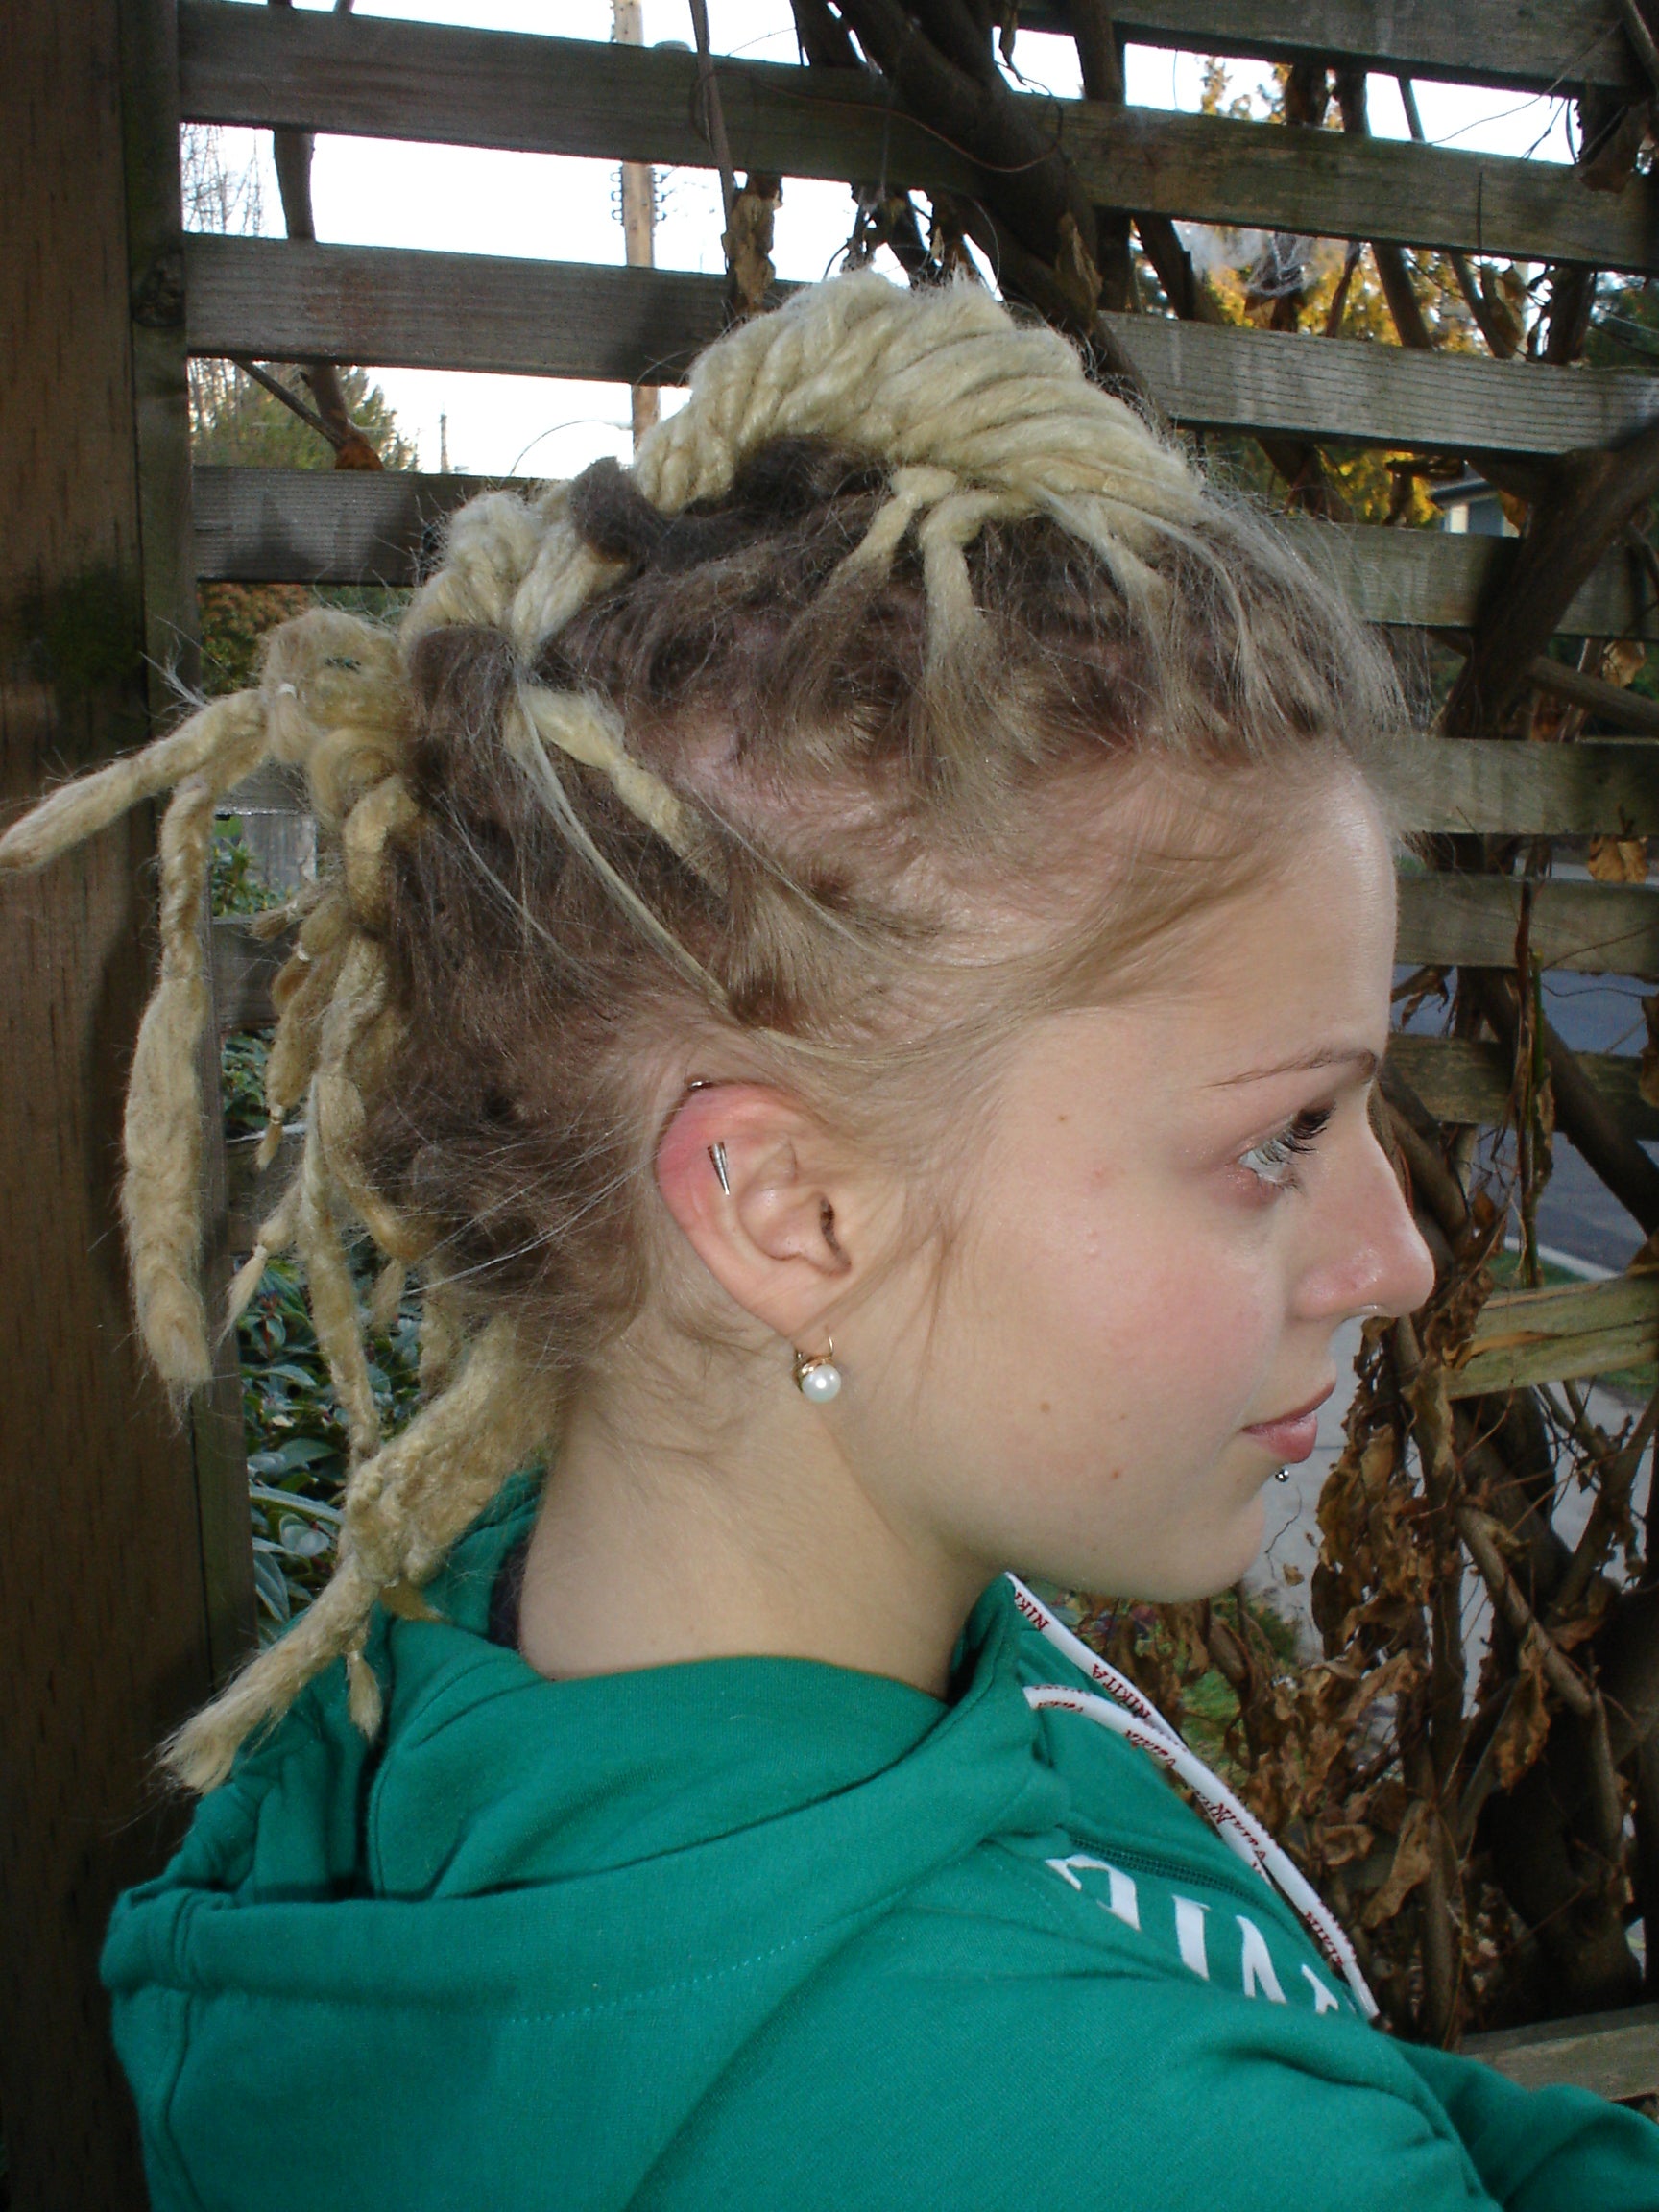 side view of dreadlock mohawk hairstyle modelled by young woman with dyed blonde dreadlocks wearing green shirt in front of arbor